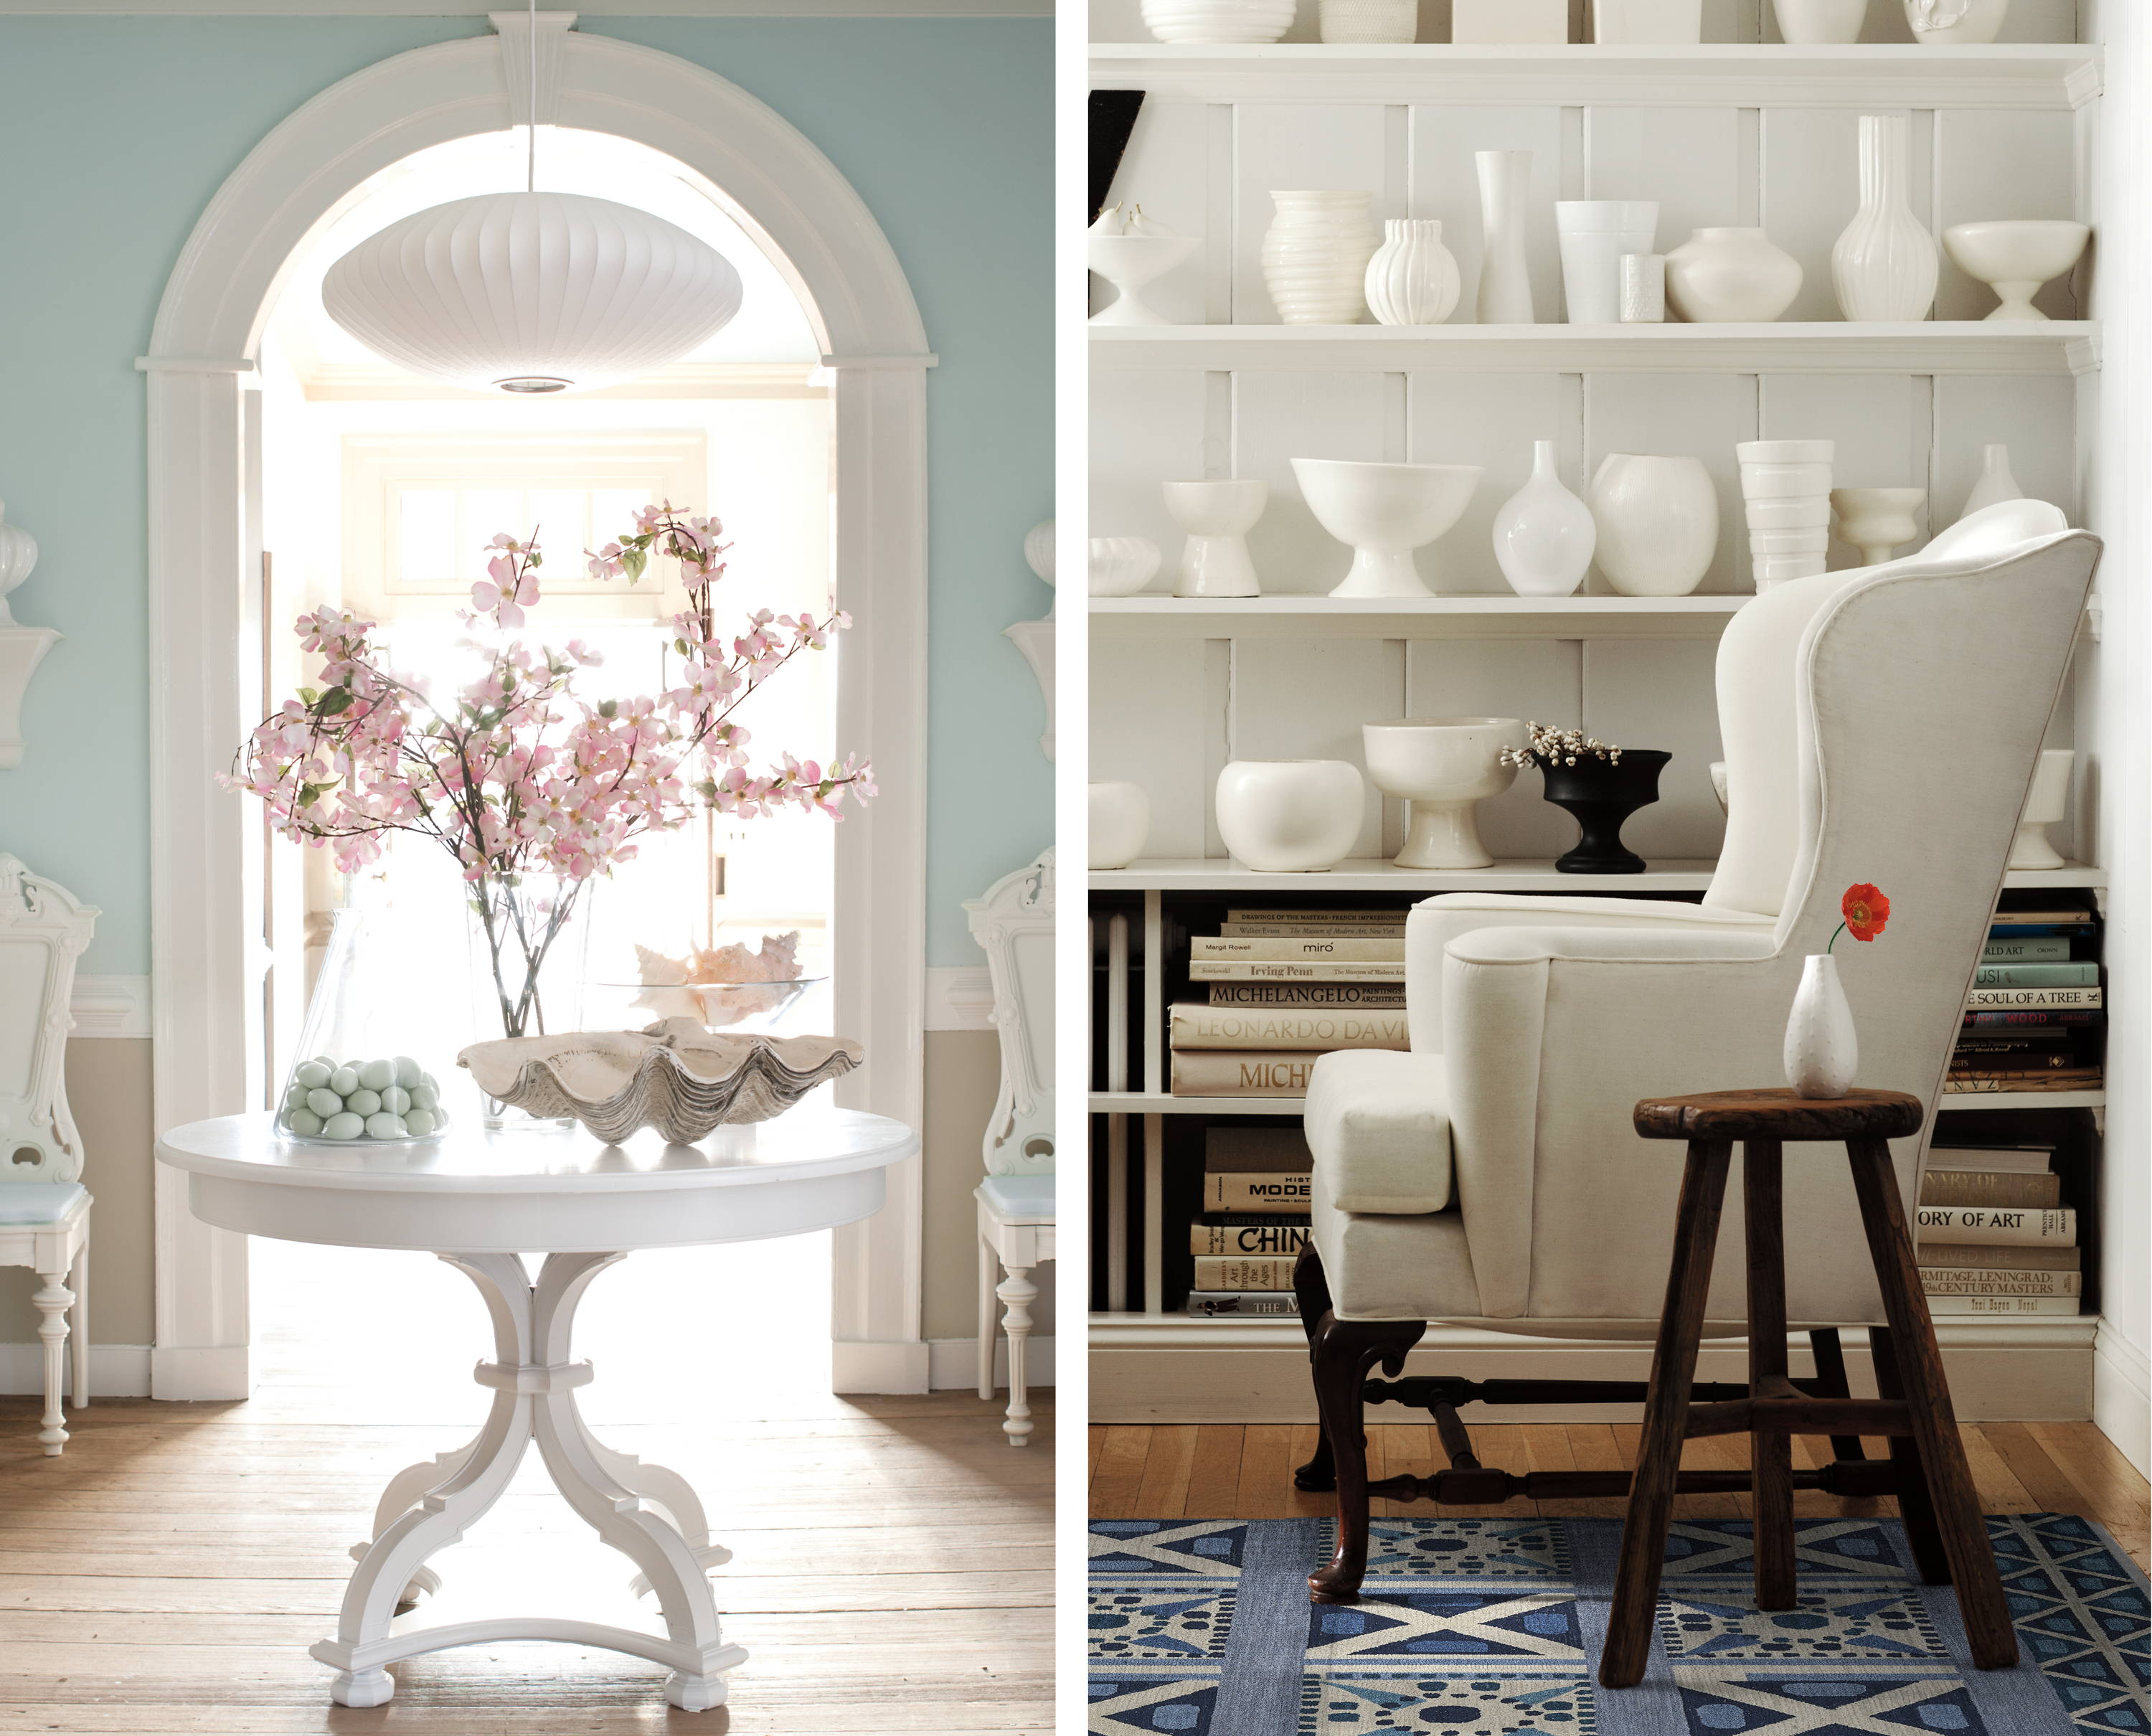 Picture of interiors with white accents and Williamsburg brand paint from Benjamin Moore